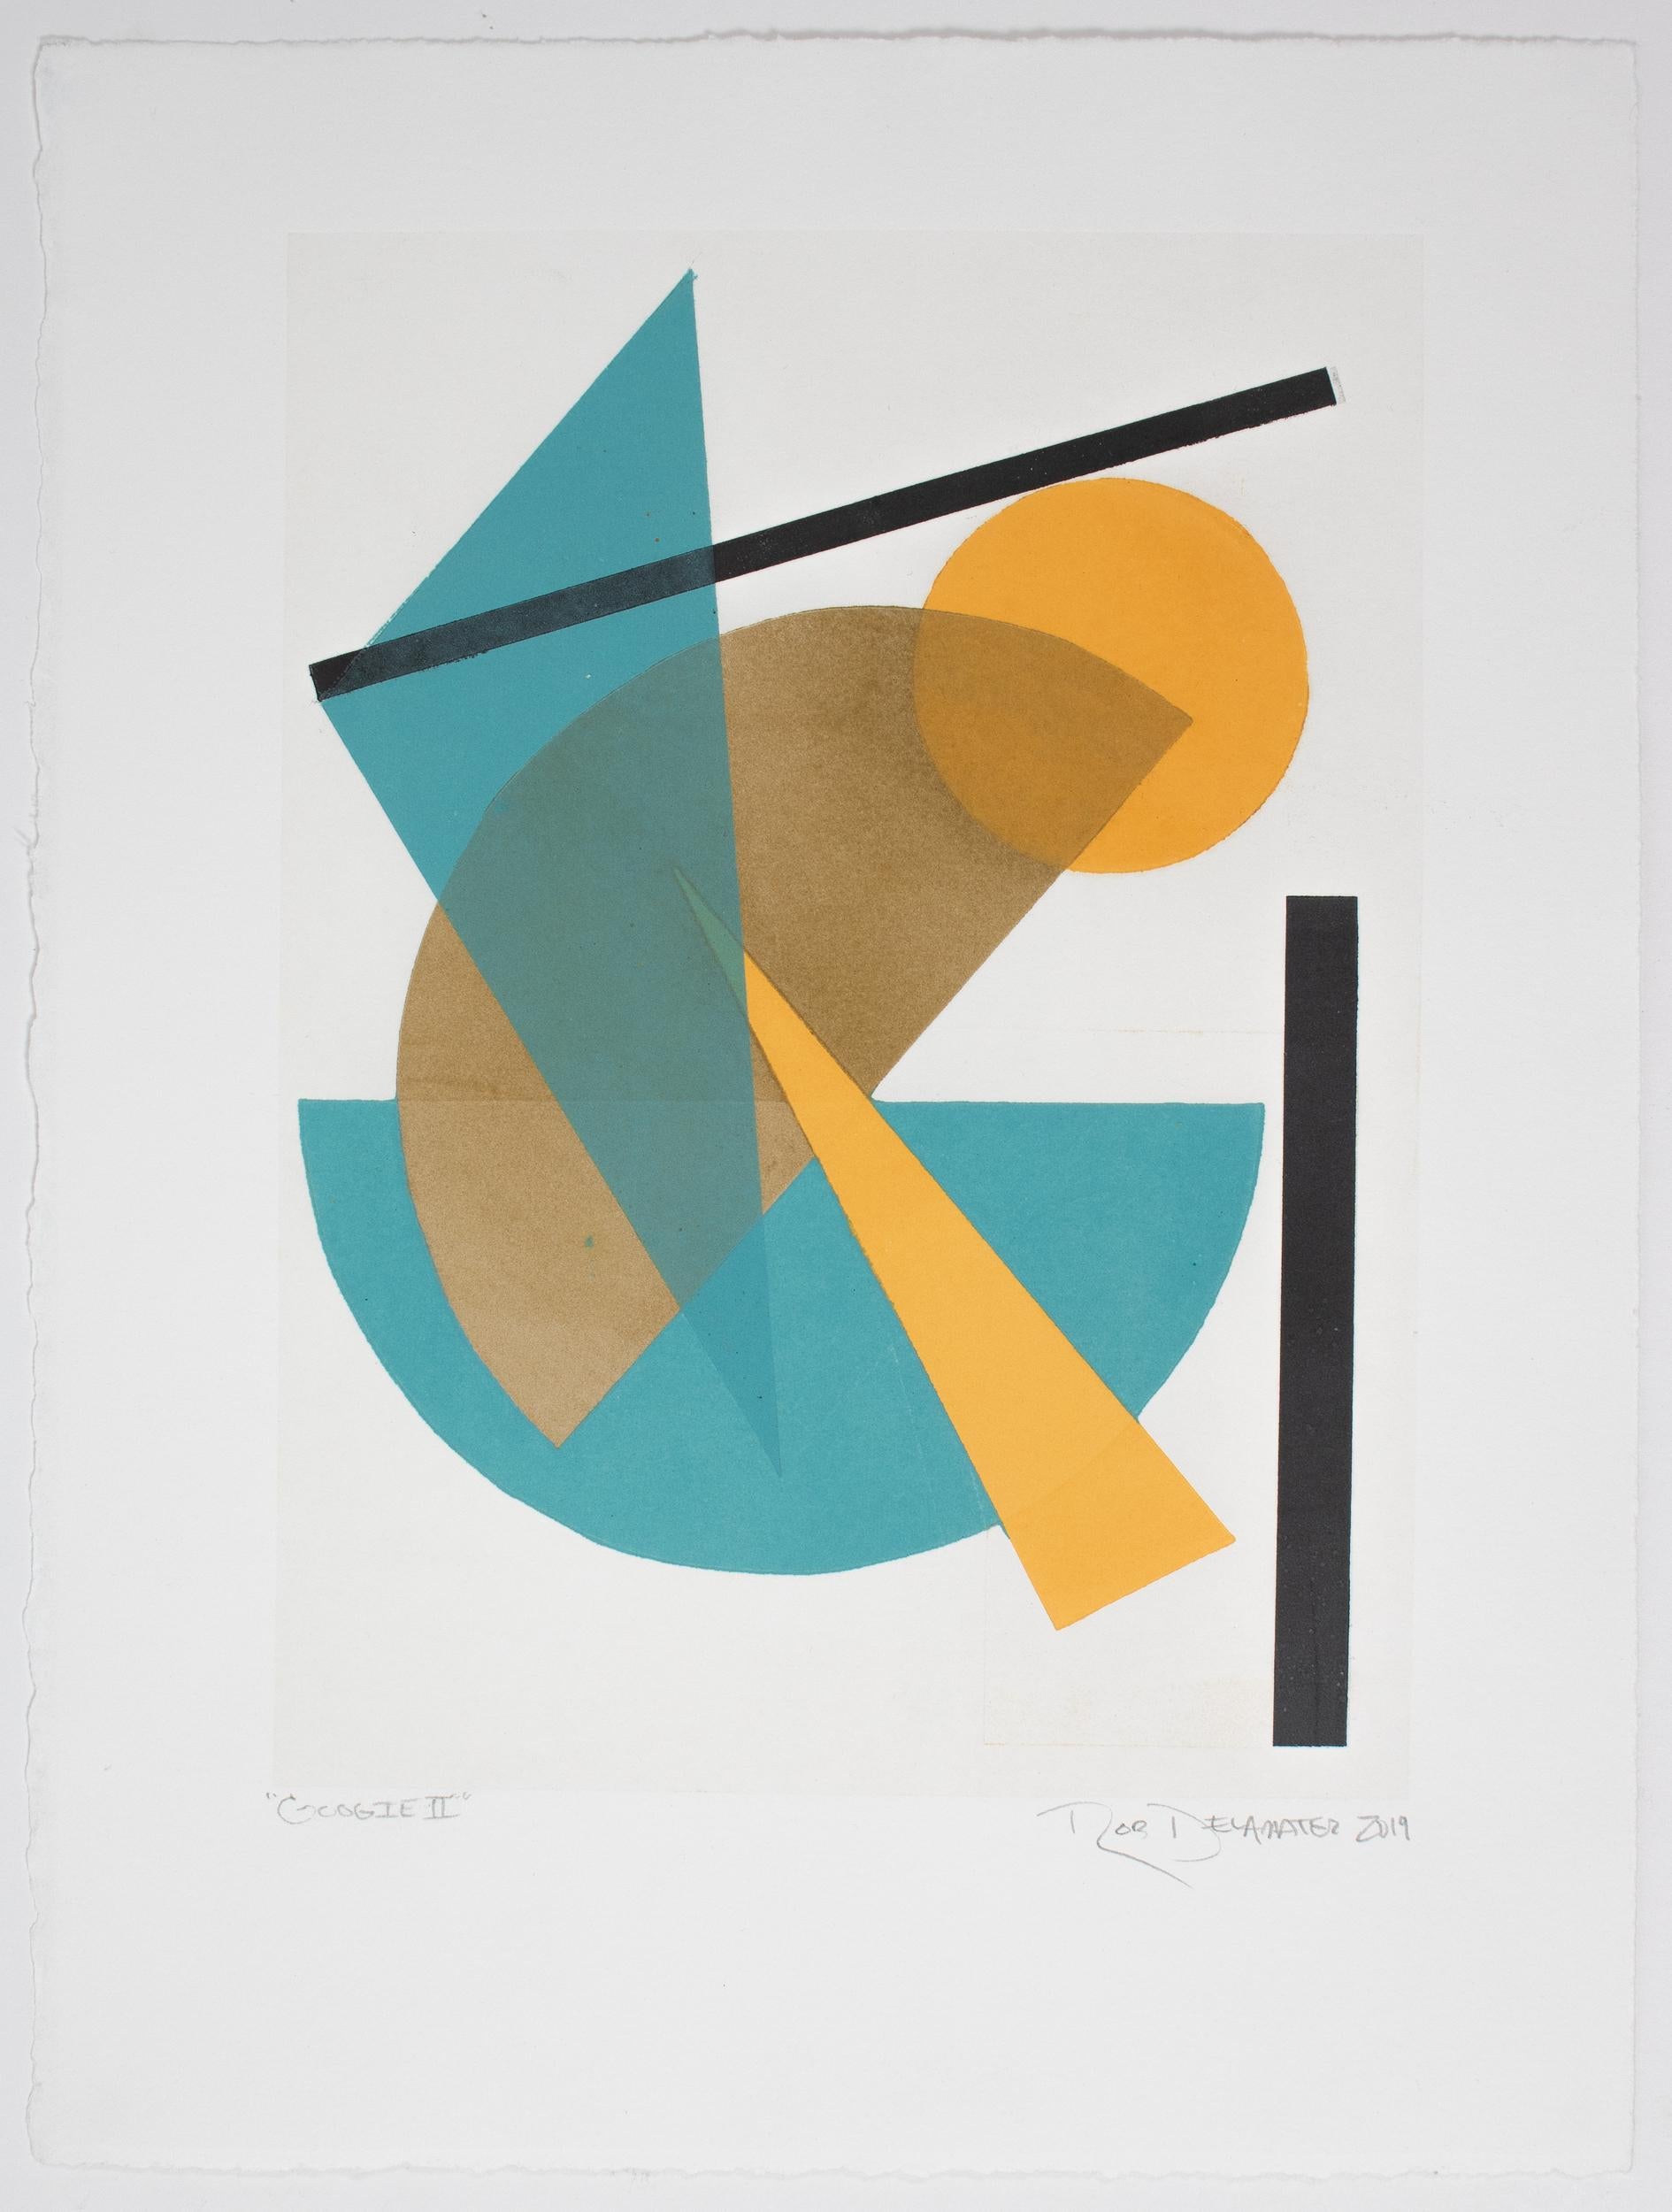 Rob Delamater Abstract Print - "Googie II" 2019 Monotype